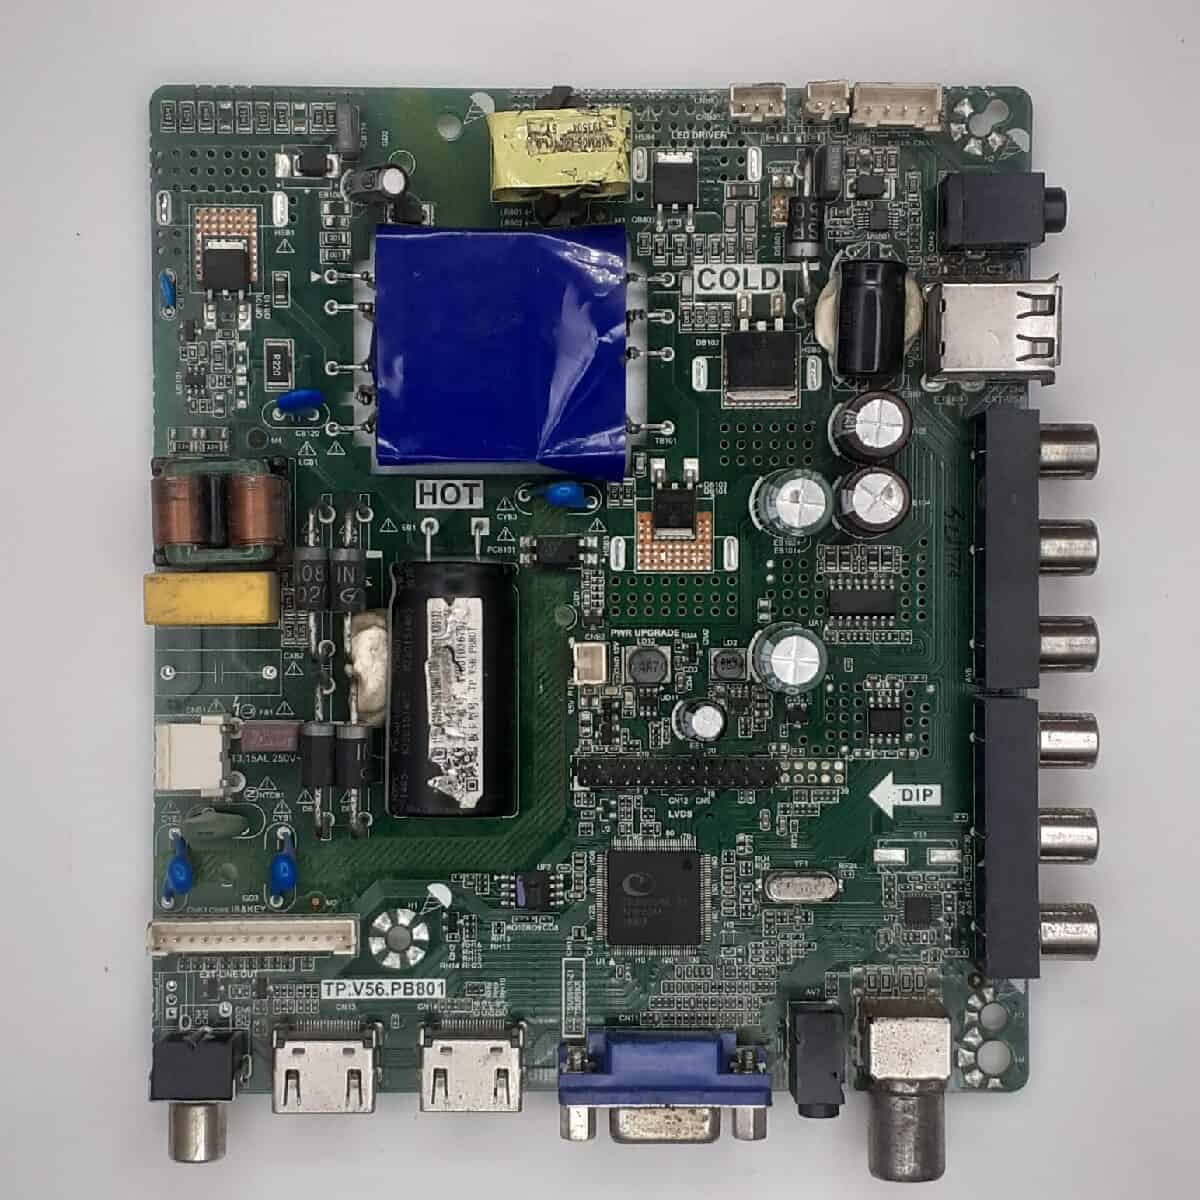 TP.V56.PB801 RECONNECT MOTHERBOARD FOR 40 INCH